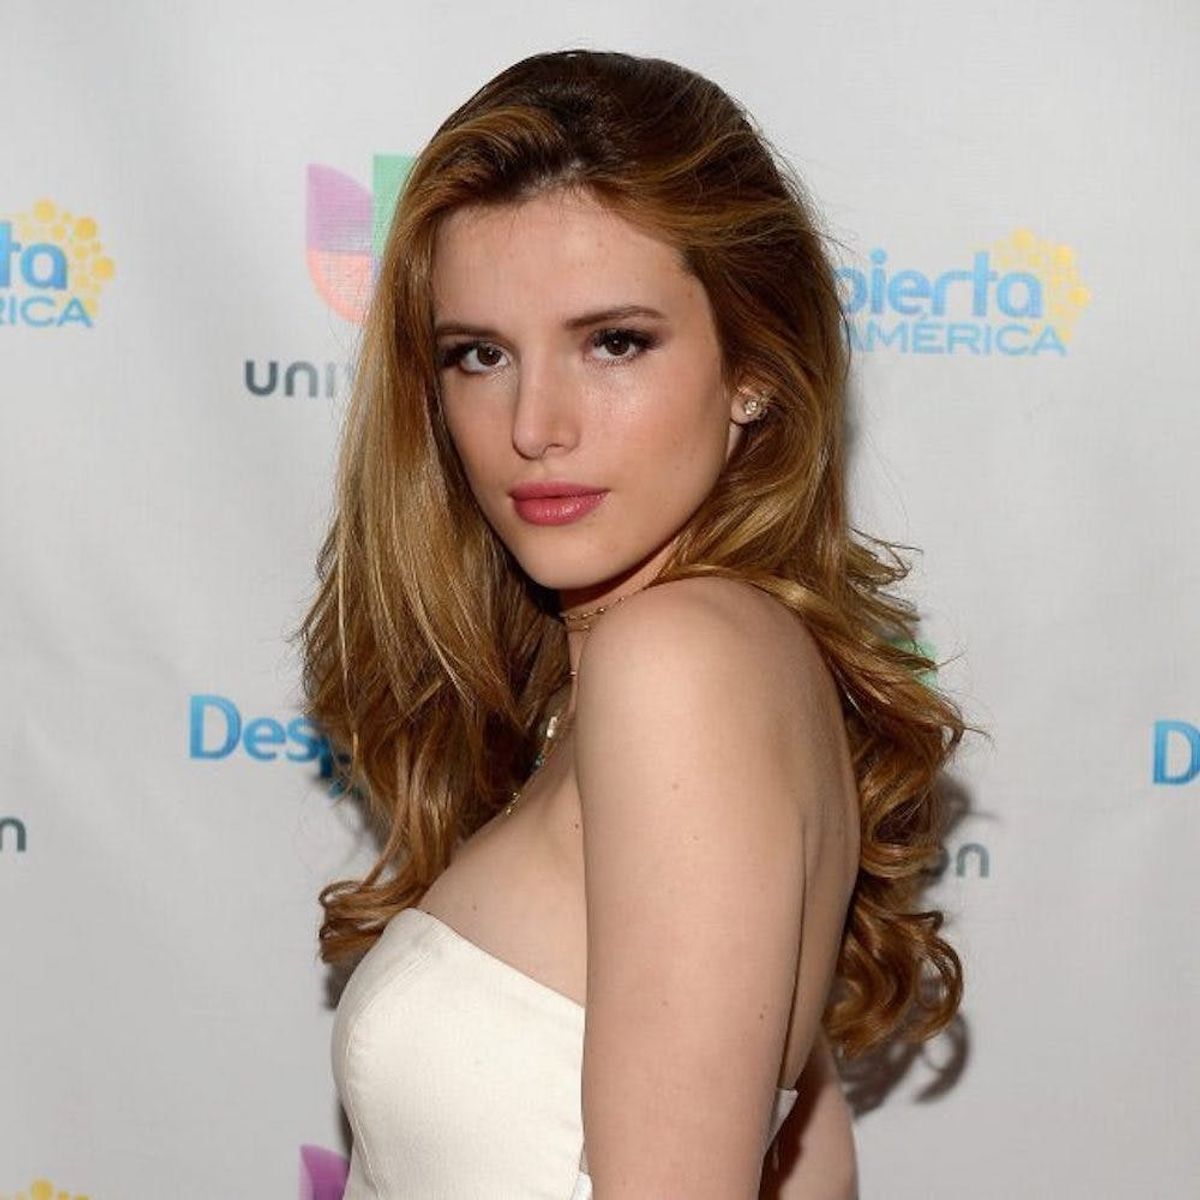 Here’s Fall’s Hottest Spin on the Choker, Courtesy of Bella Thorne